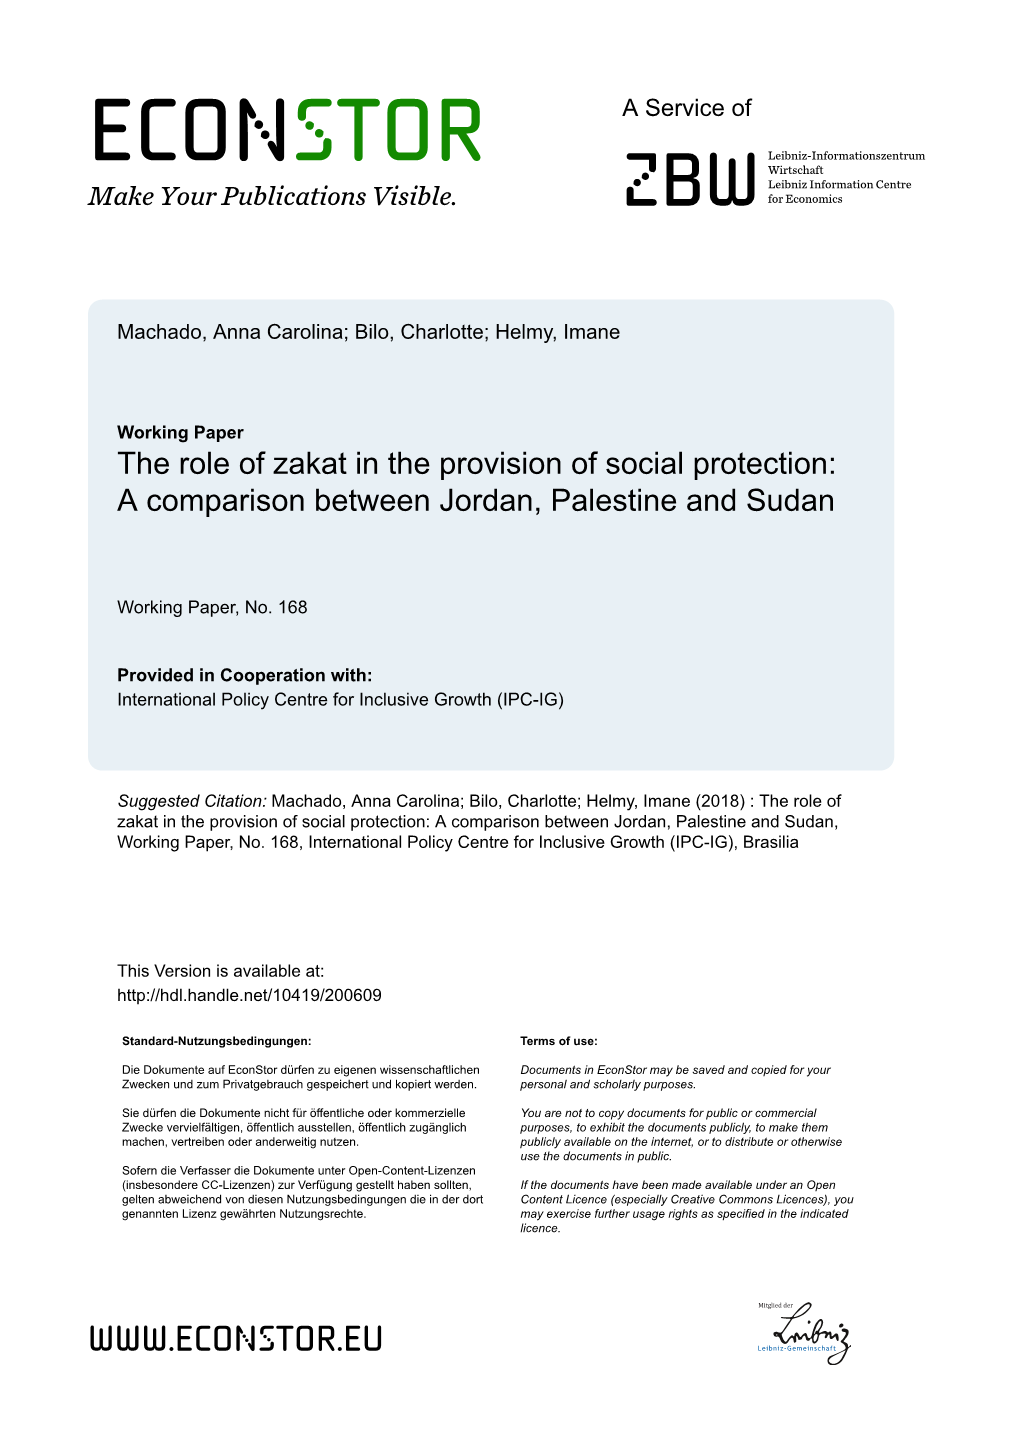 The Role of Zakat in the Provision of Social Protection: a Comparison Between Jordan, Palestine and Sudan